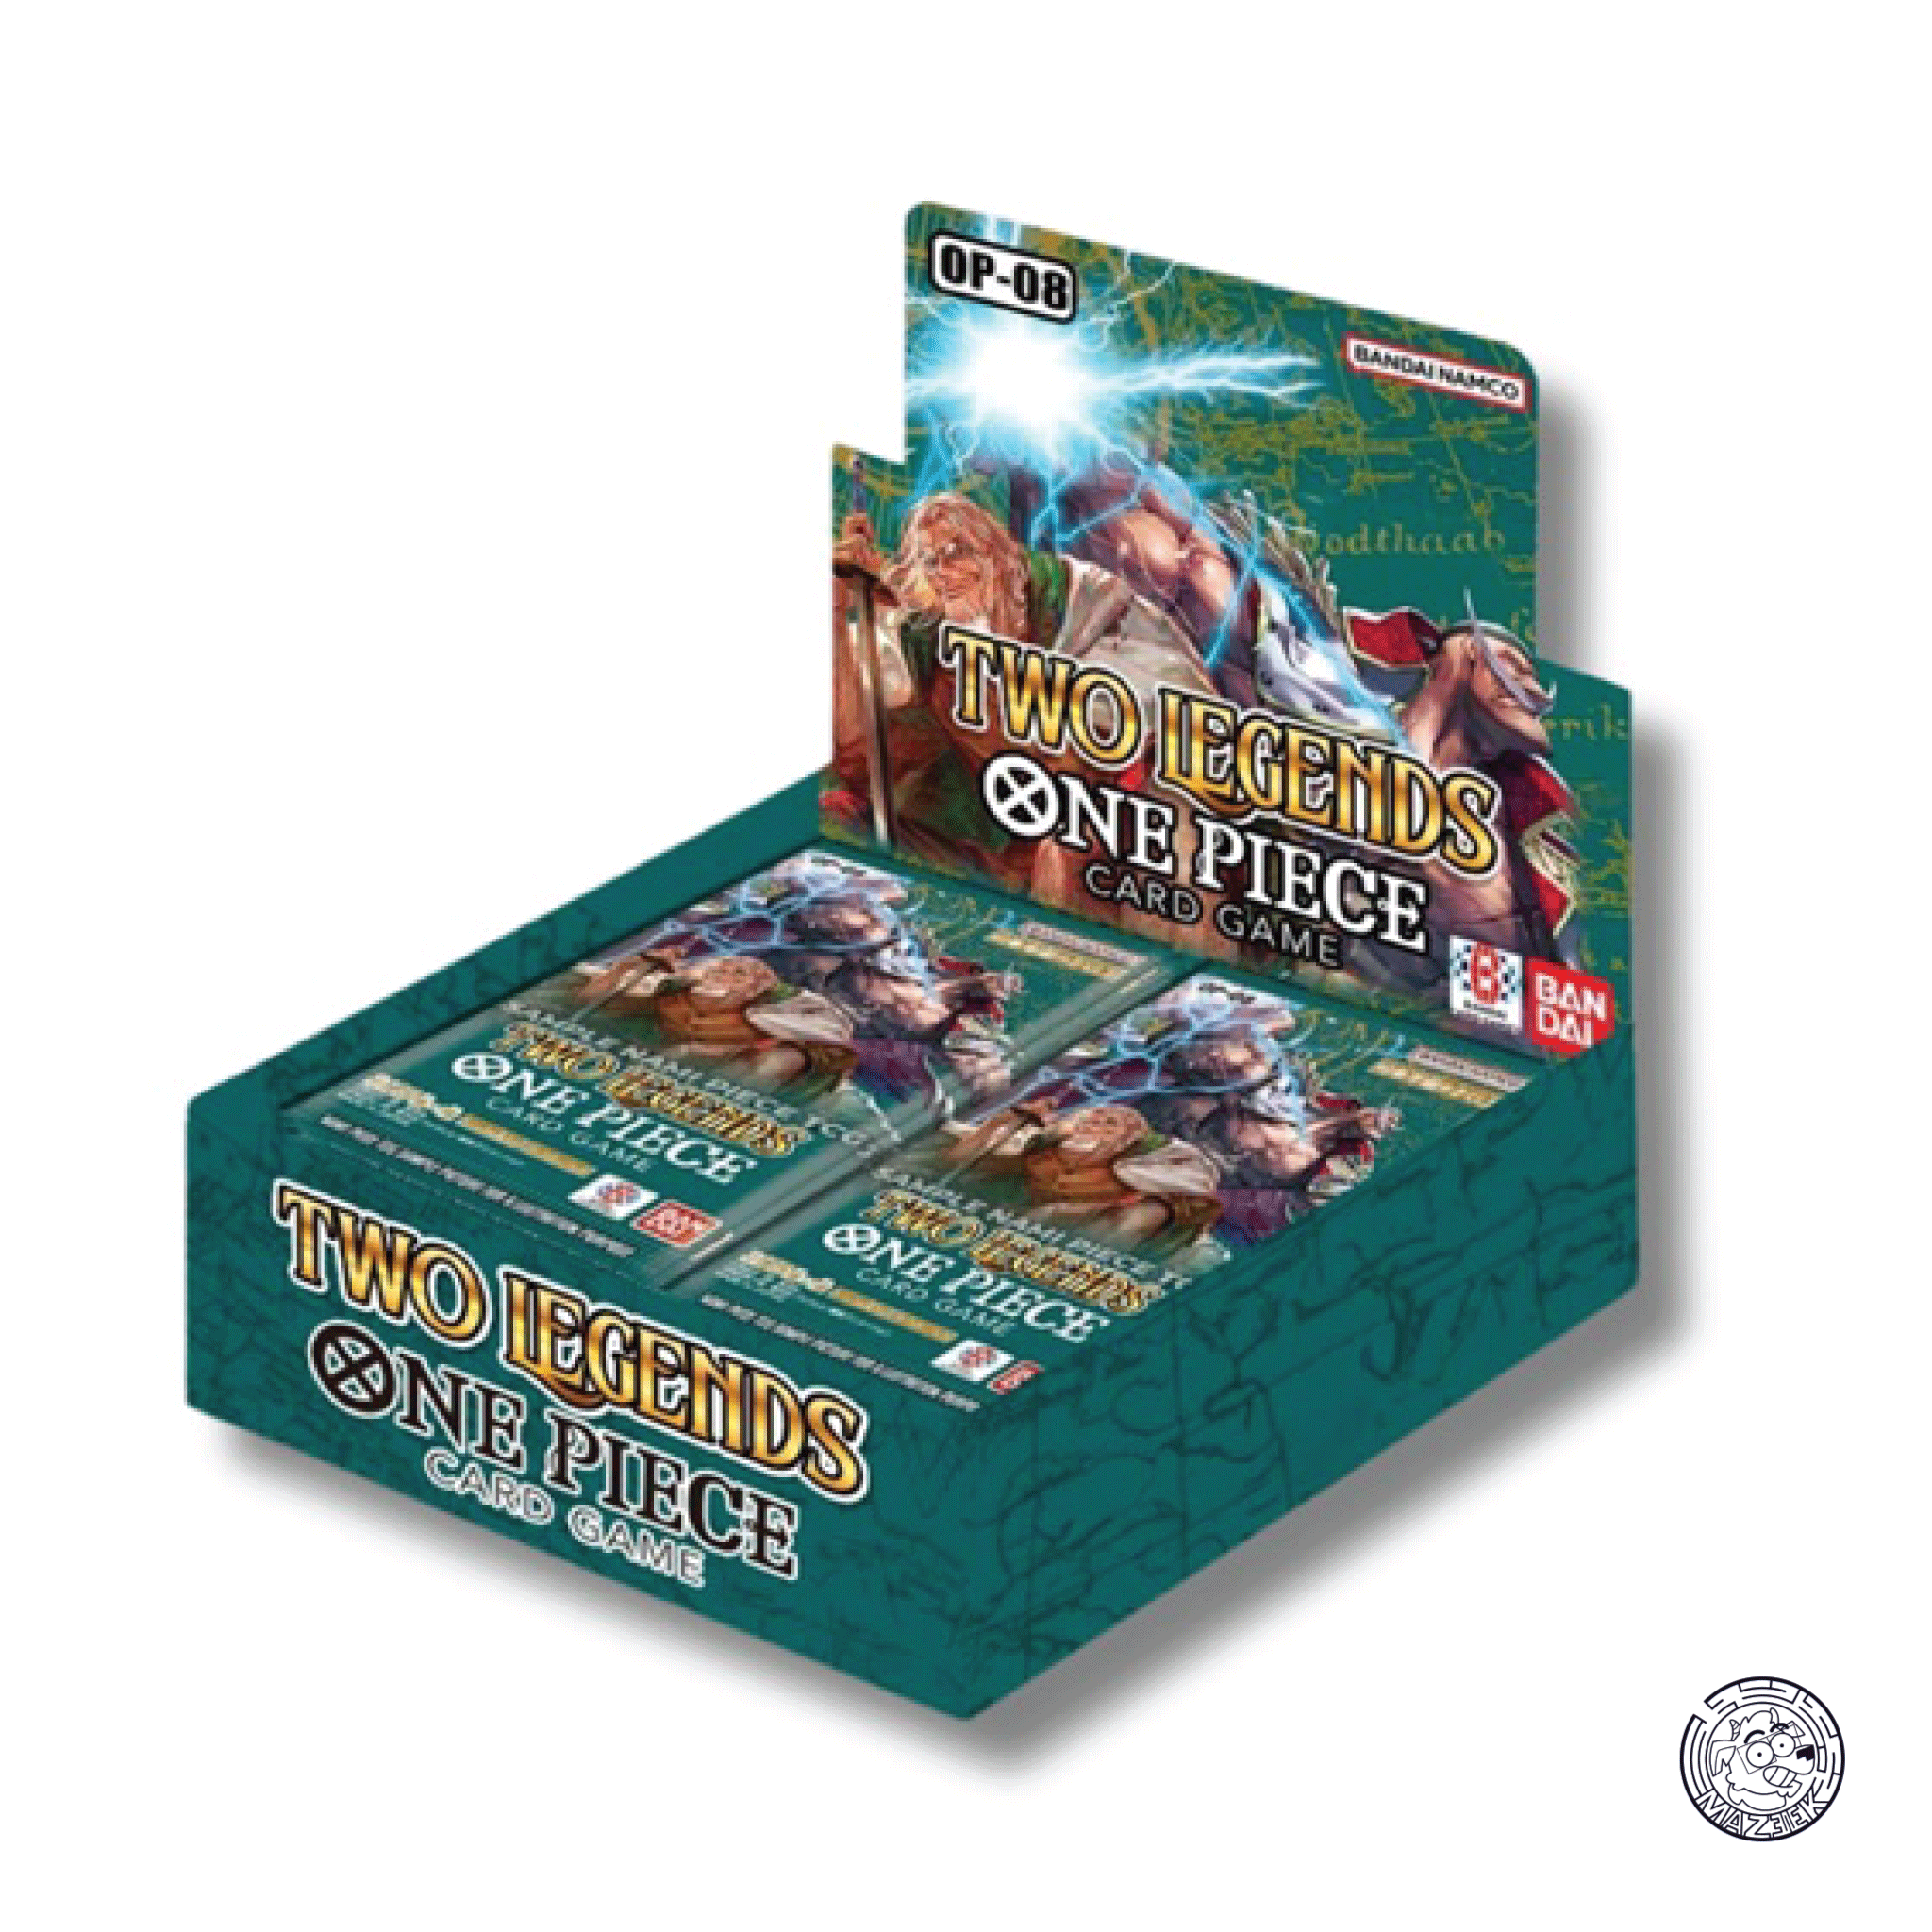 One piece! Card Game OP-08: Two Legends (24 packs) ENG